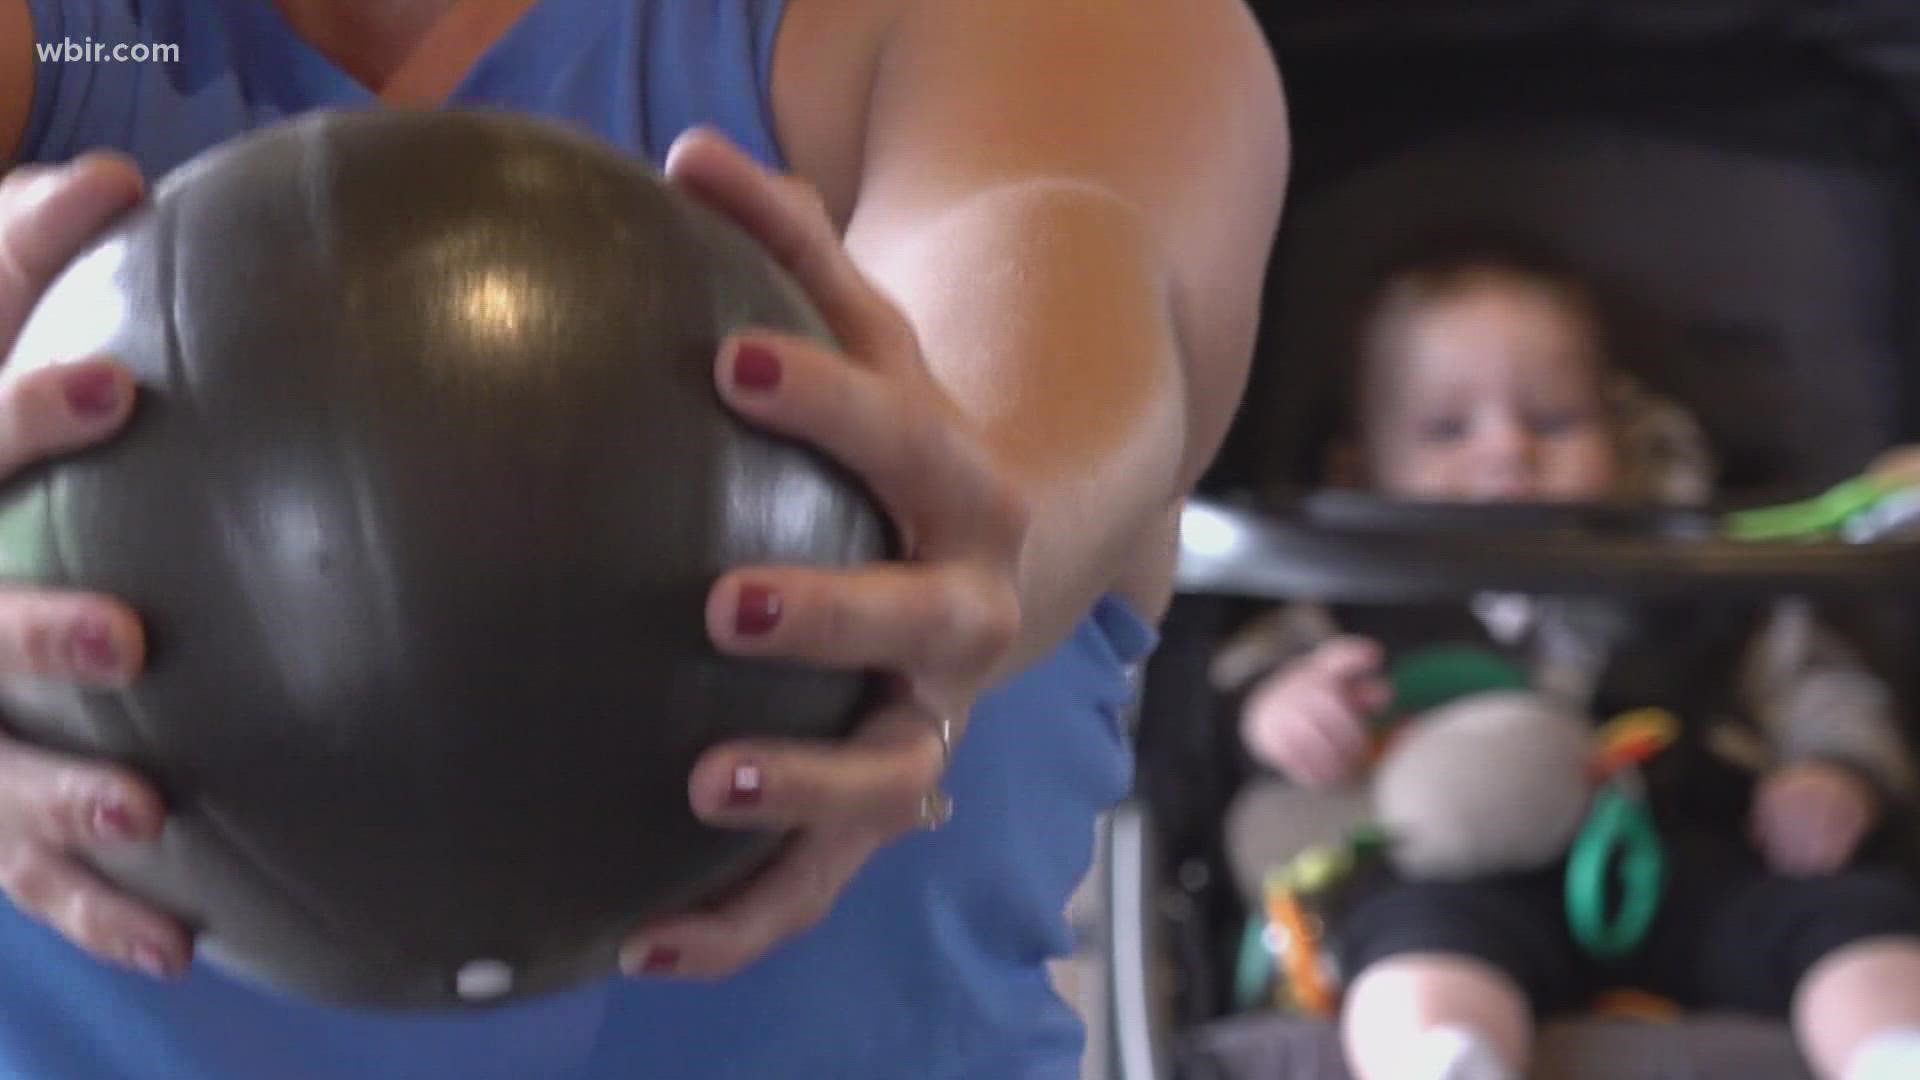 It's a workout program called "Fit4Mom" that Robyn Wendel introduced to the Knoxville area in May.